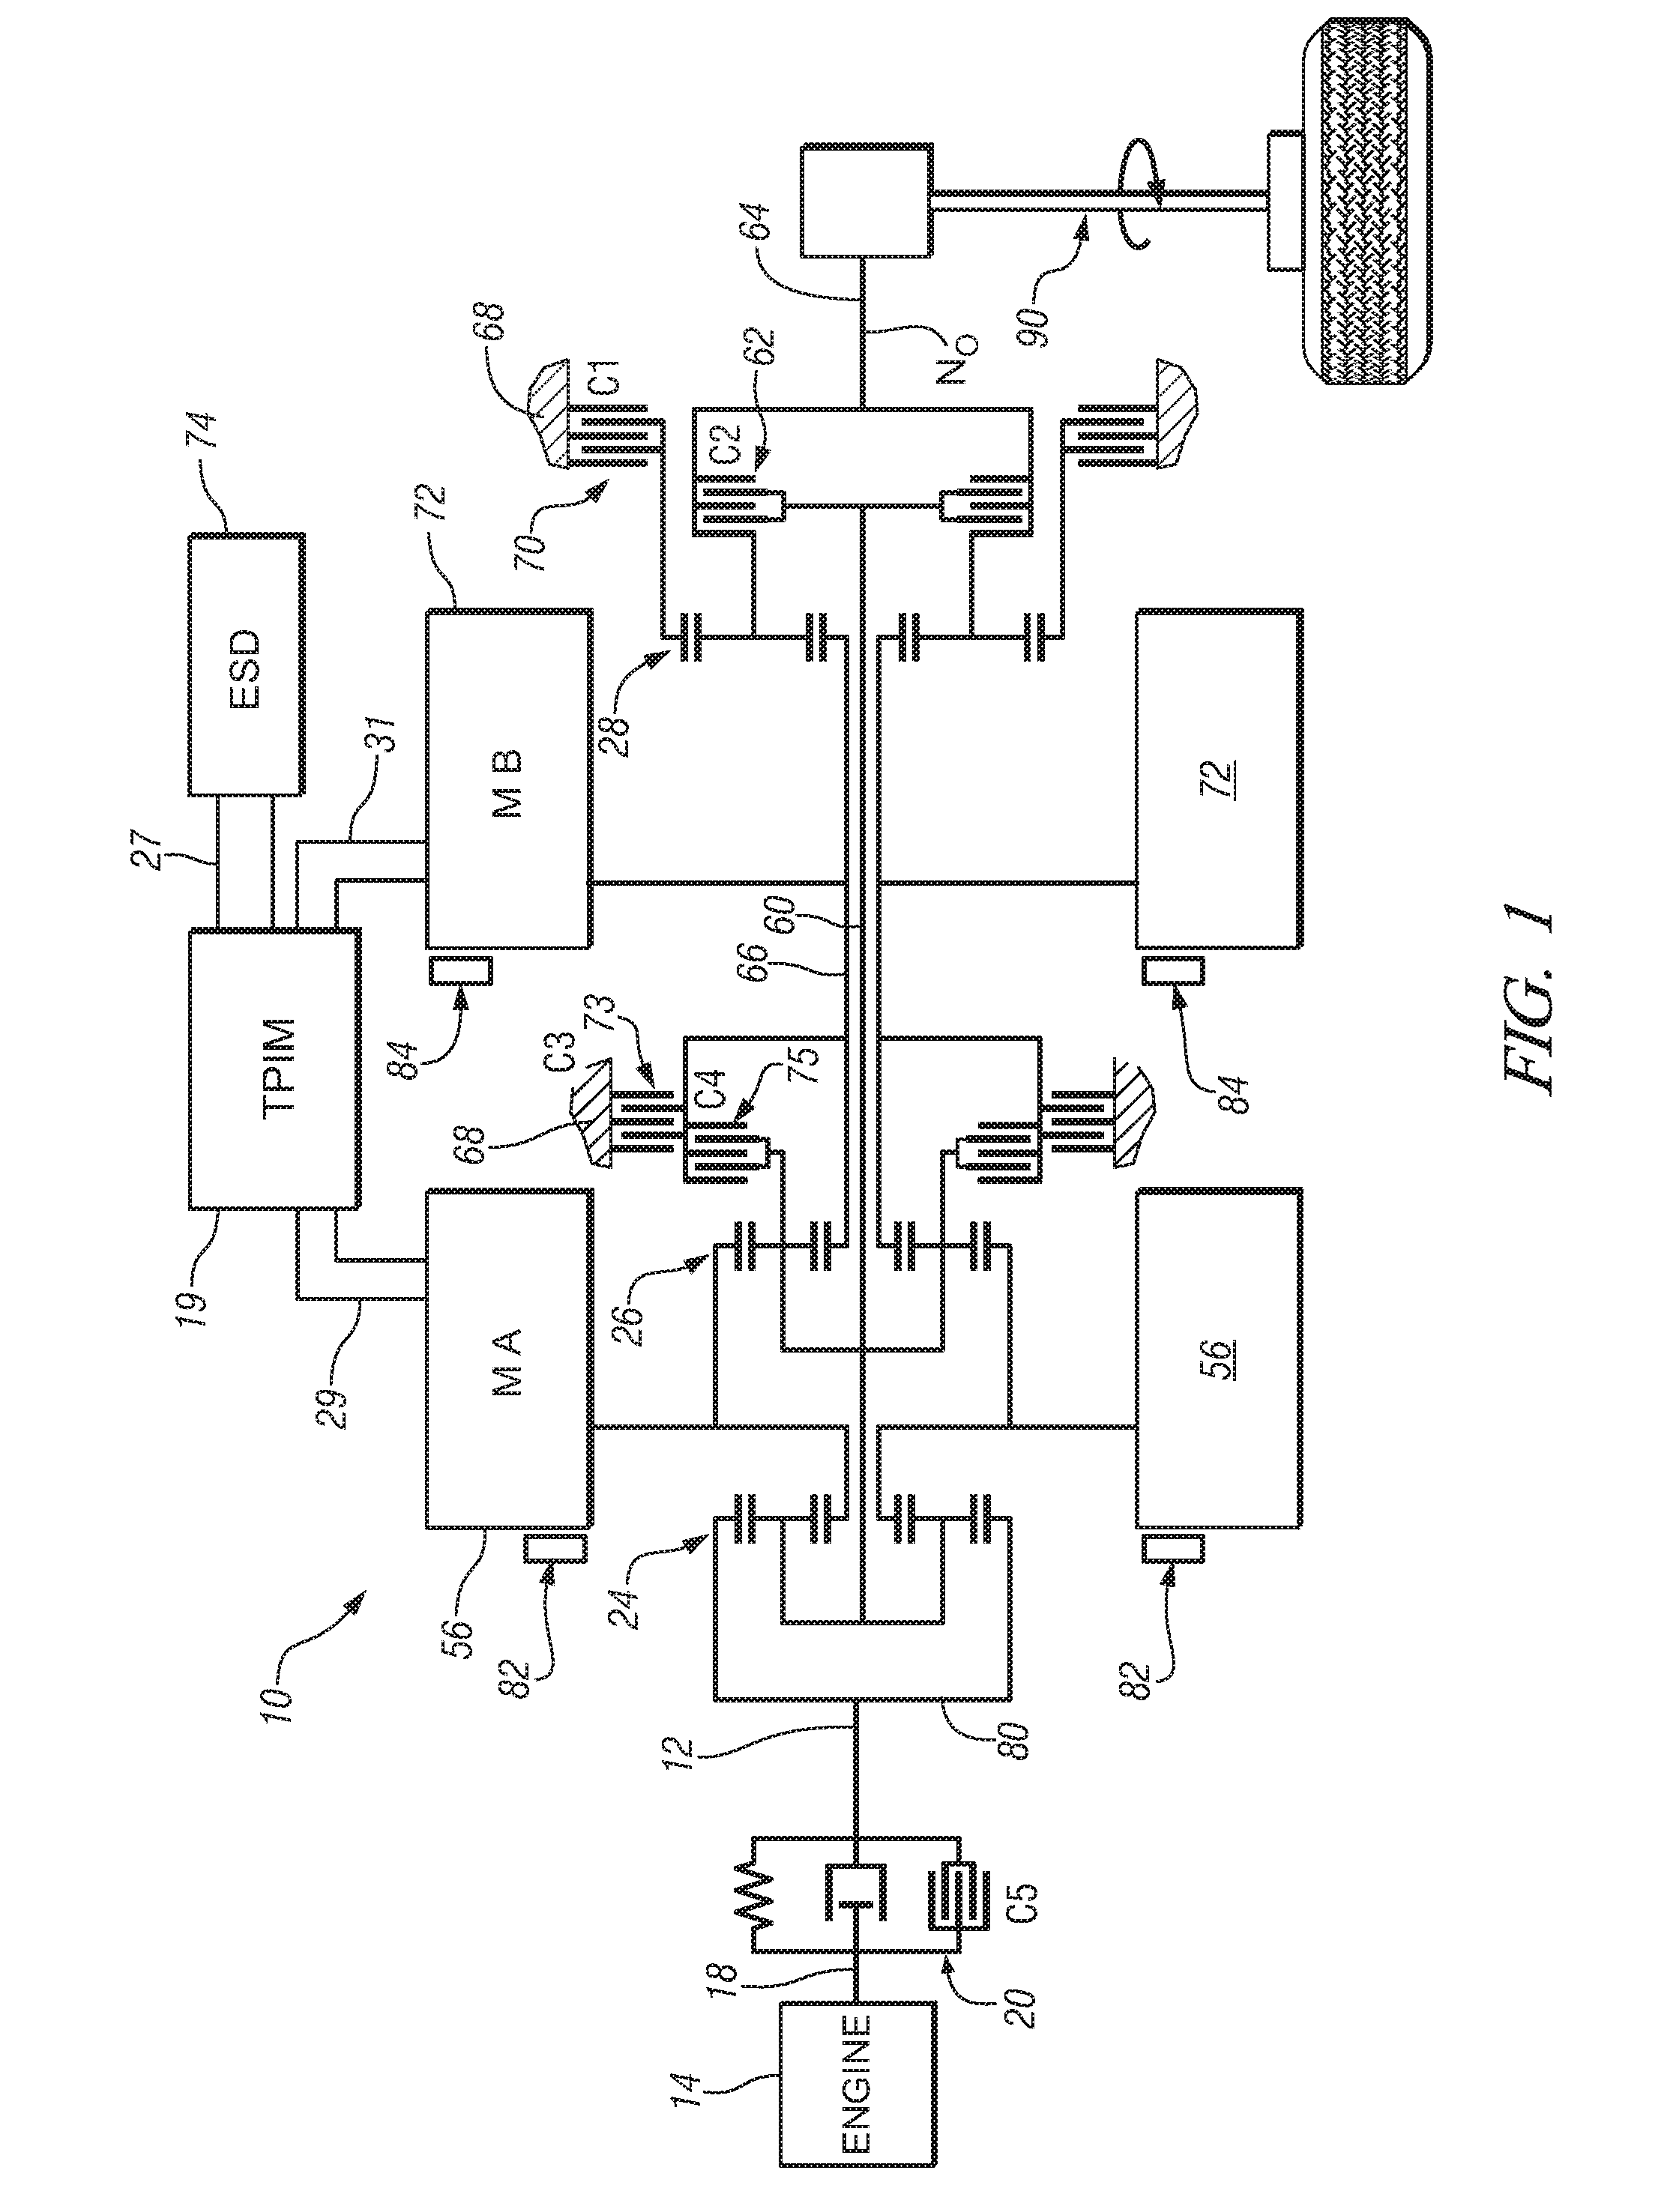 Method and apparatus to control engine stop for a hybrid powertrain system